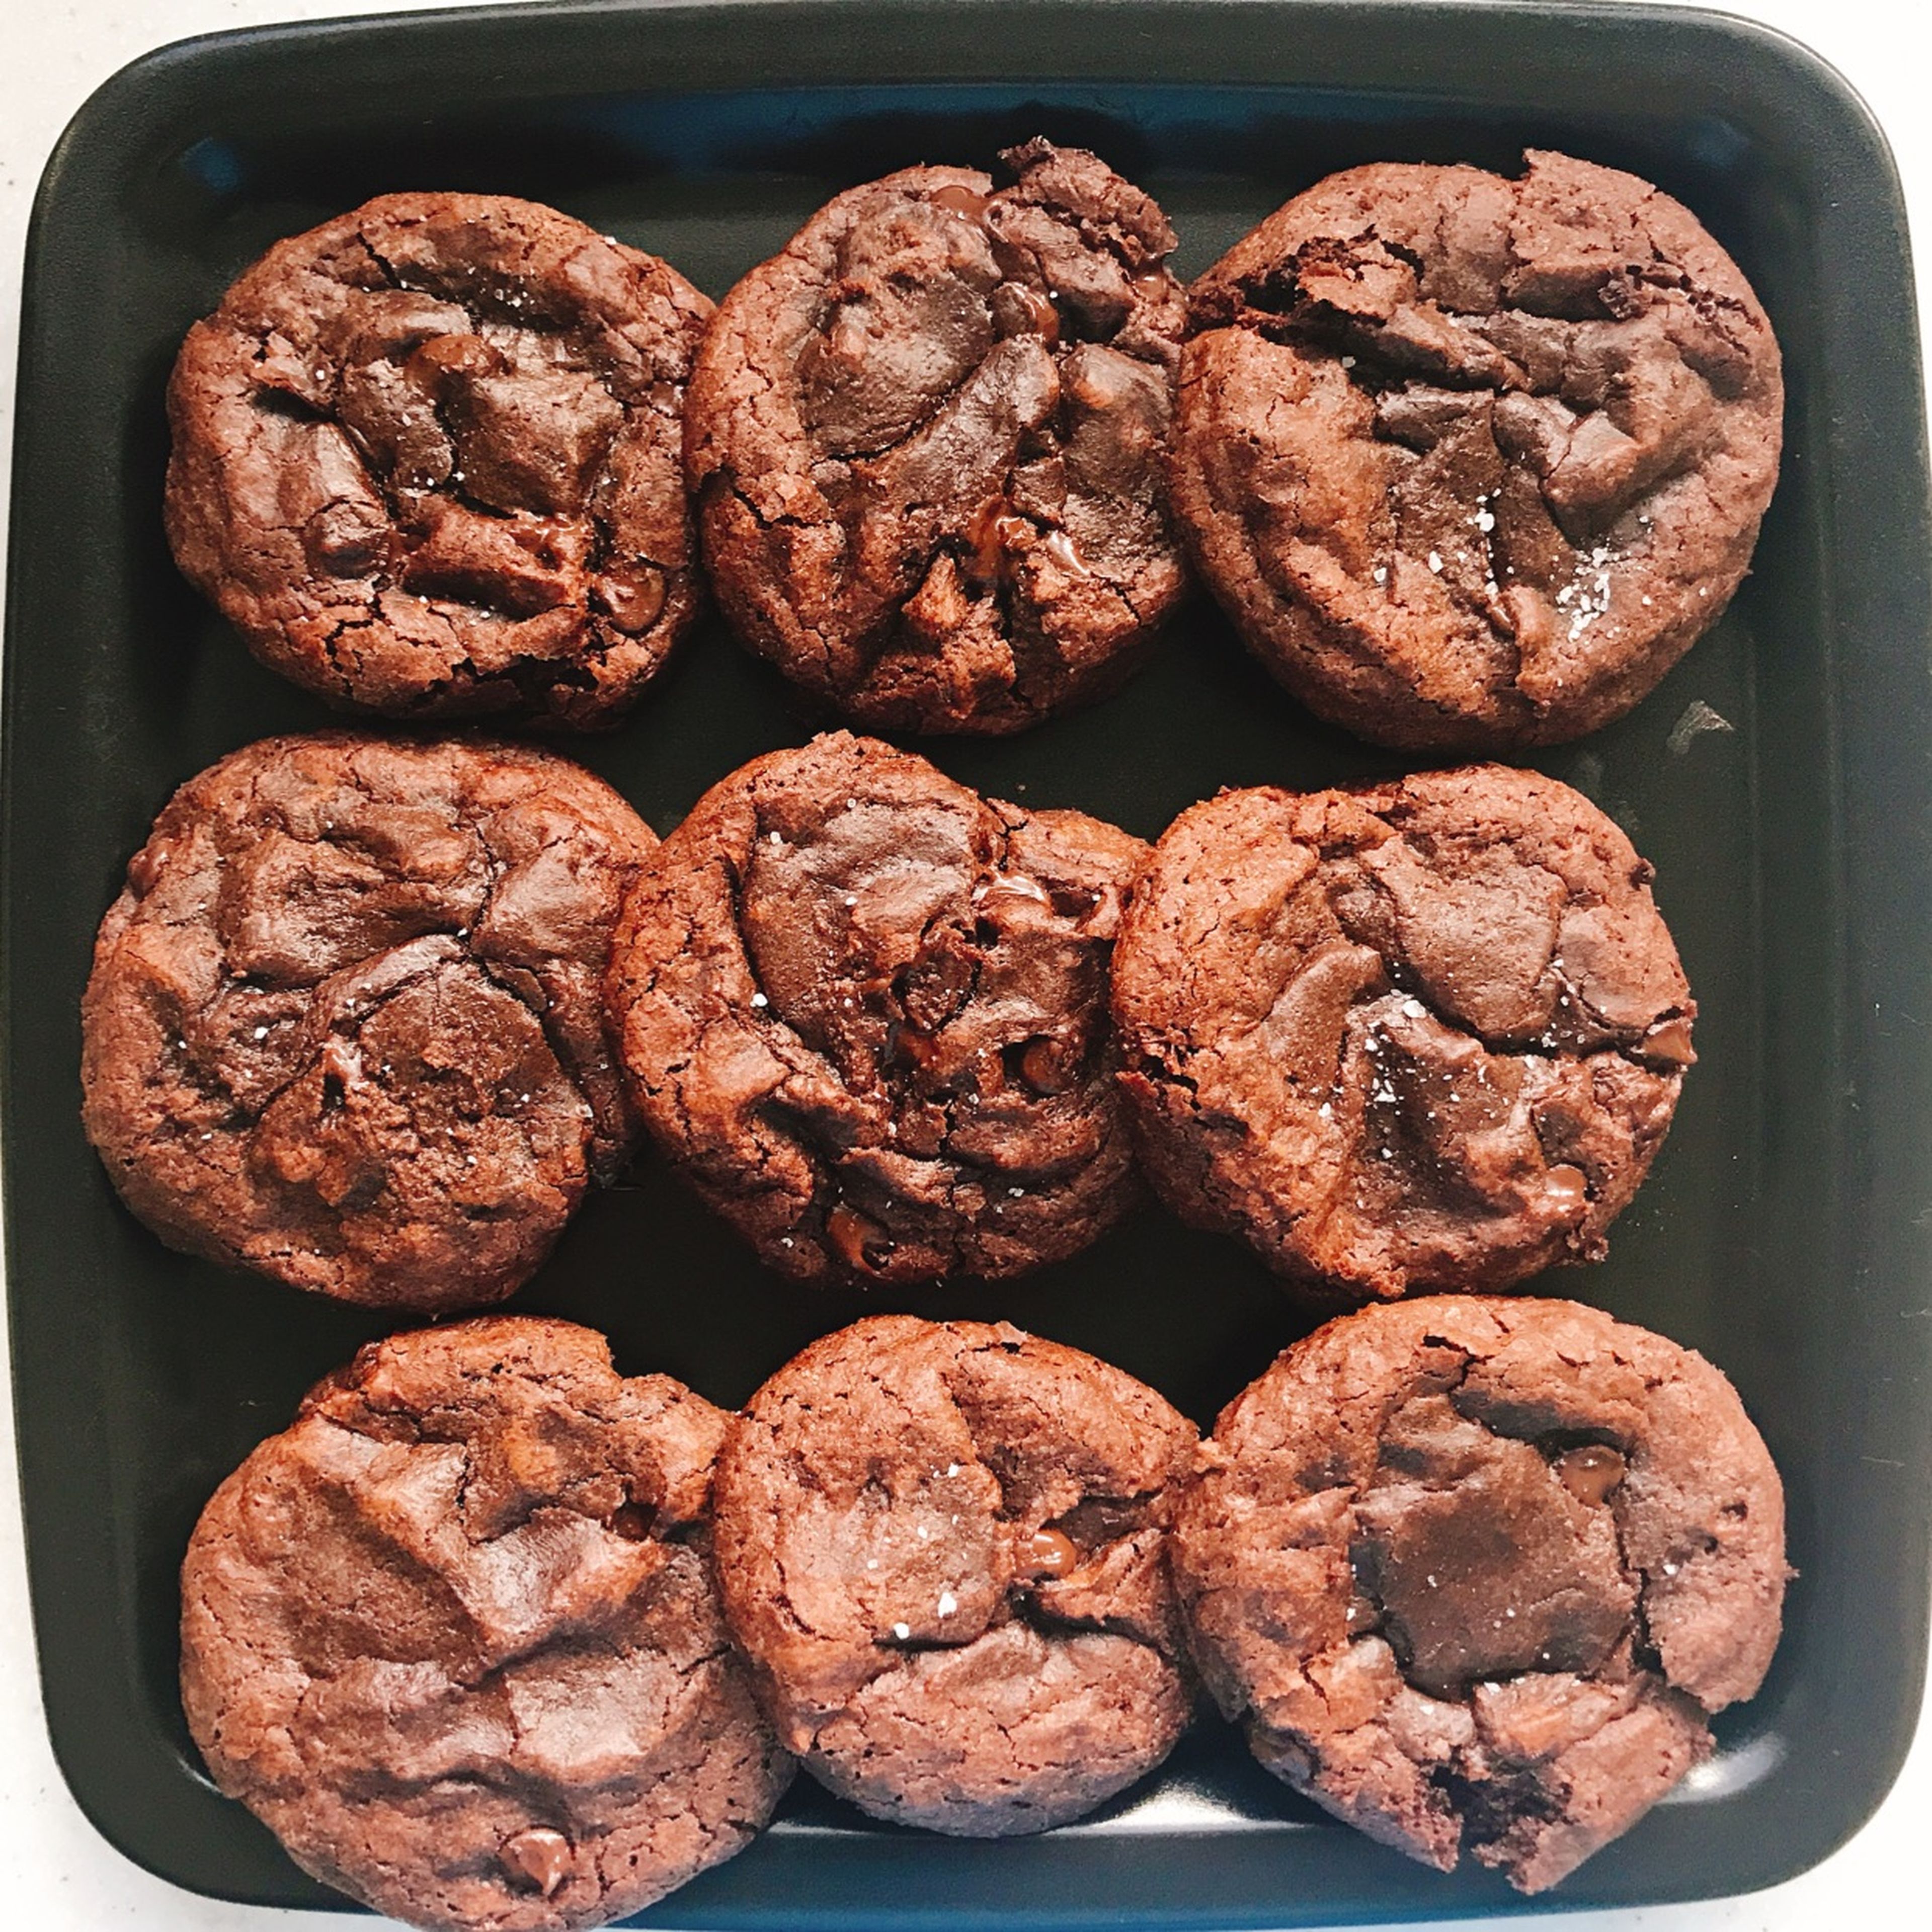 Double chocolate salted caramel cookies